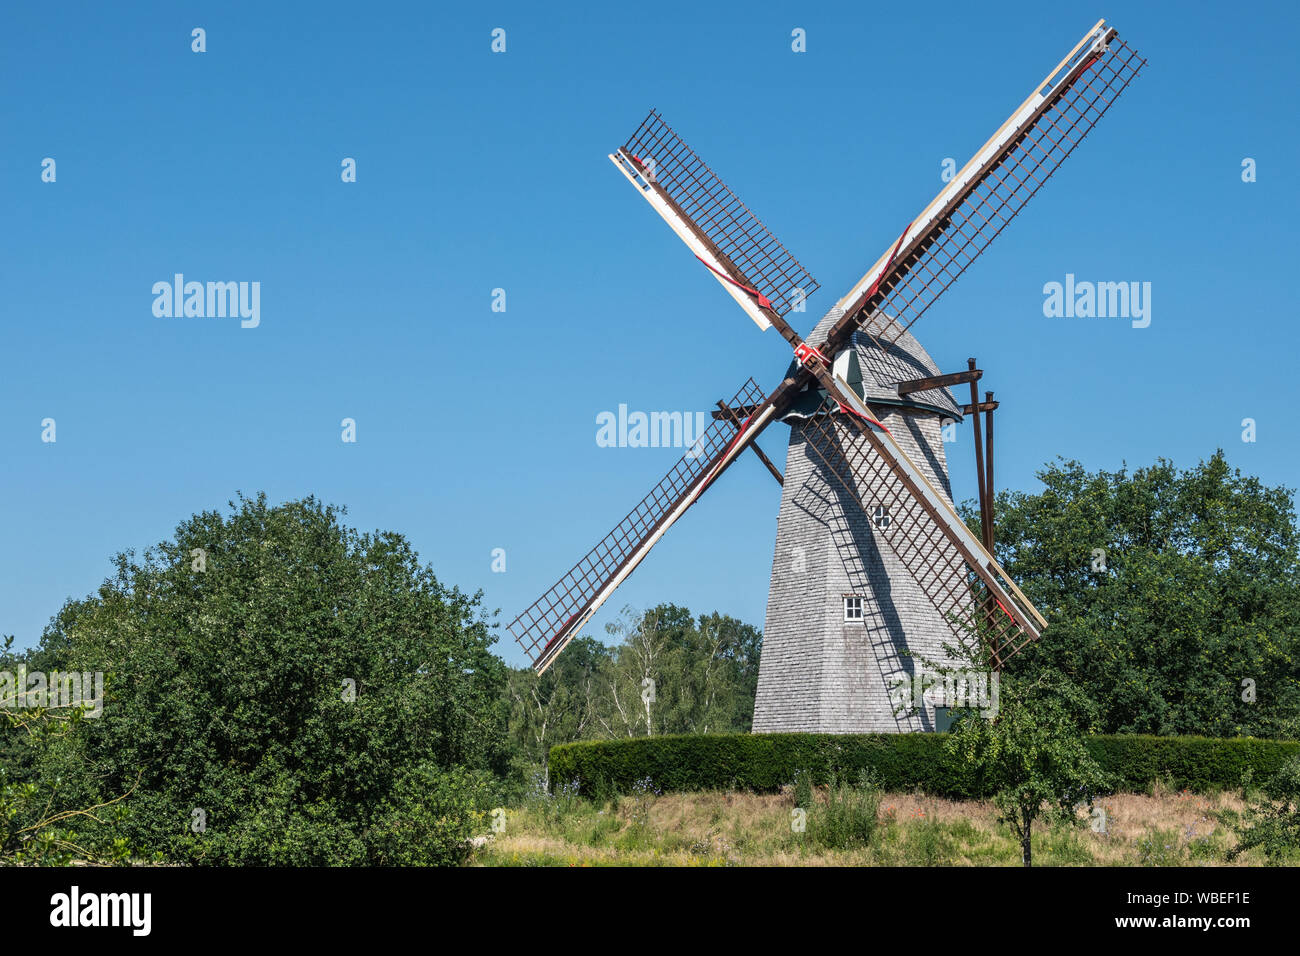 Bokrijk, Belgium - June 27, 2019: Windmill of Schulen is set in green environment of meadow and surrounded by trees under blue sky. No sails on wings. Stock Photo